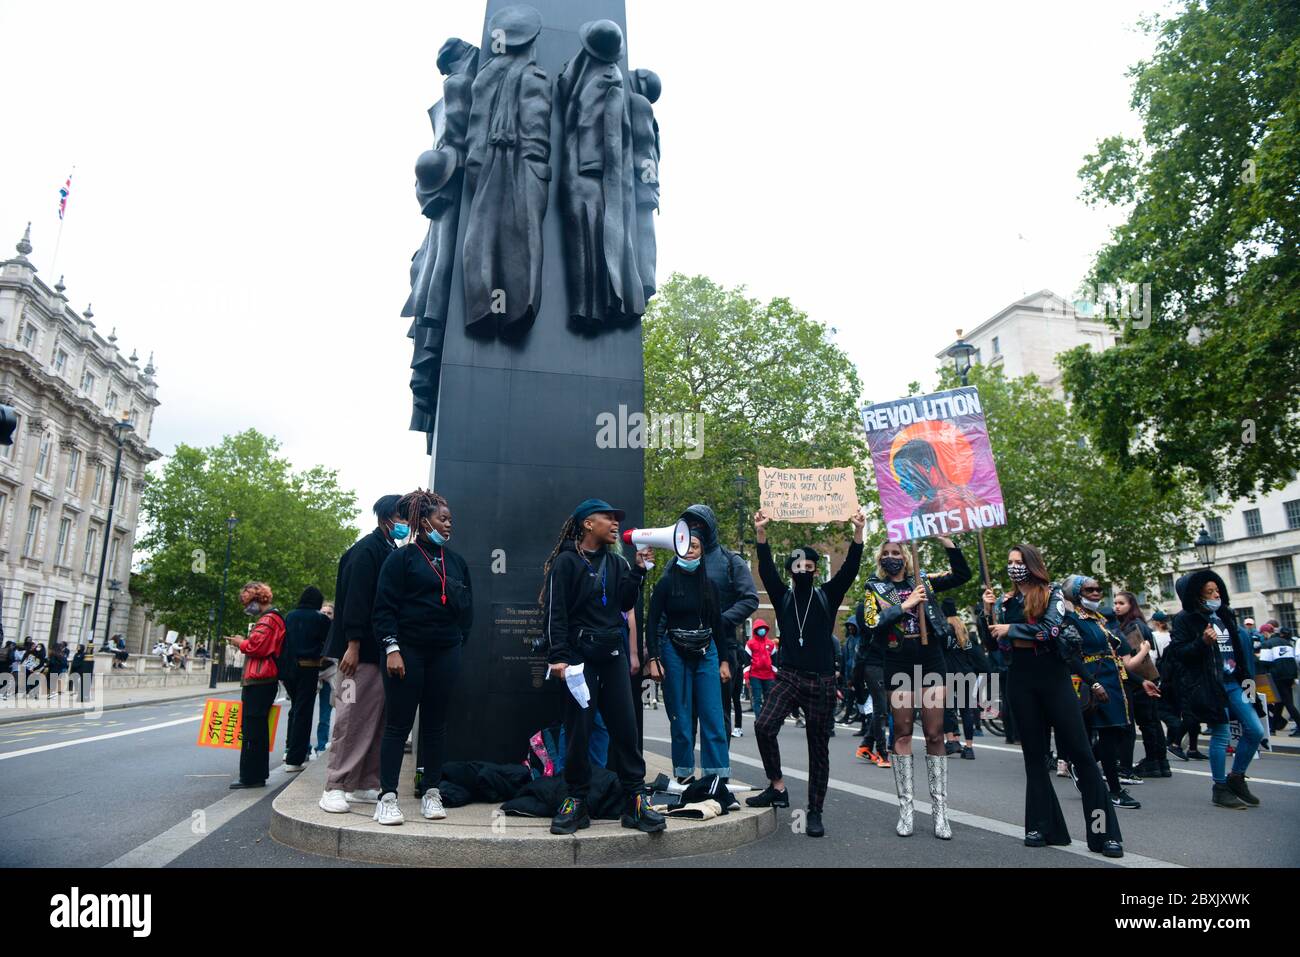 marching for Black Lives Matter , london 7th June 2020, photo Antonio Pagano/Alamy Stock Photo